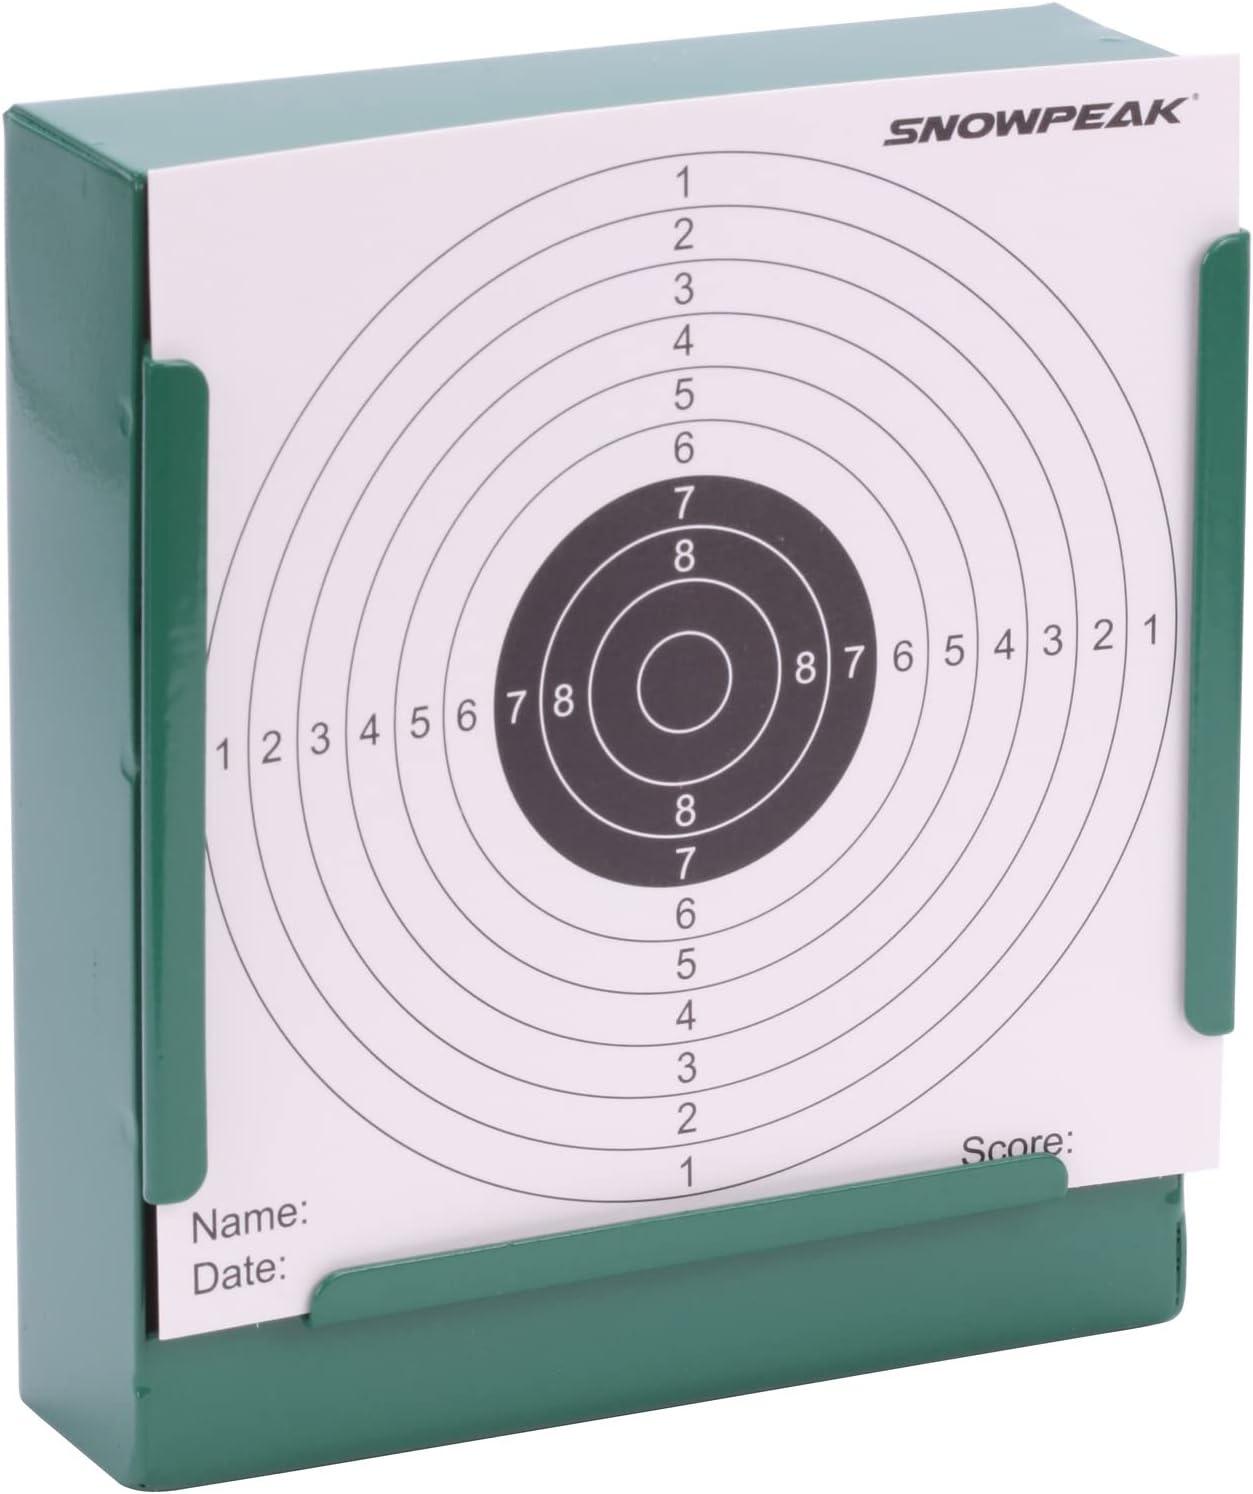 SNOWPEAK #1404 TAGBOARD TARGETS, 140X140MM - 100's - NeonSales South Africa